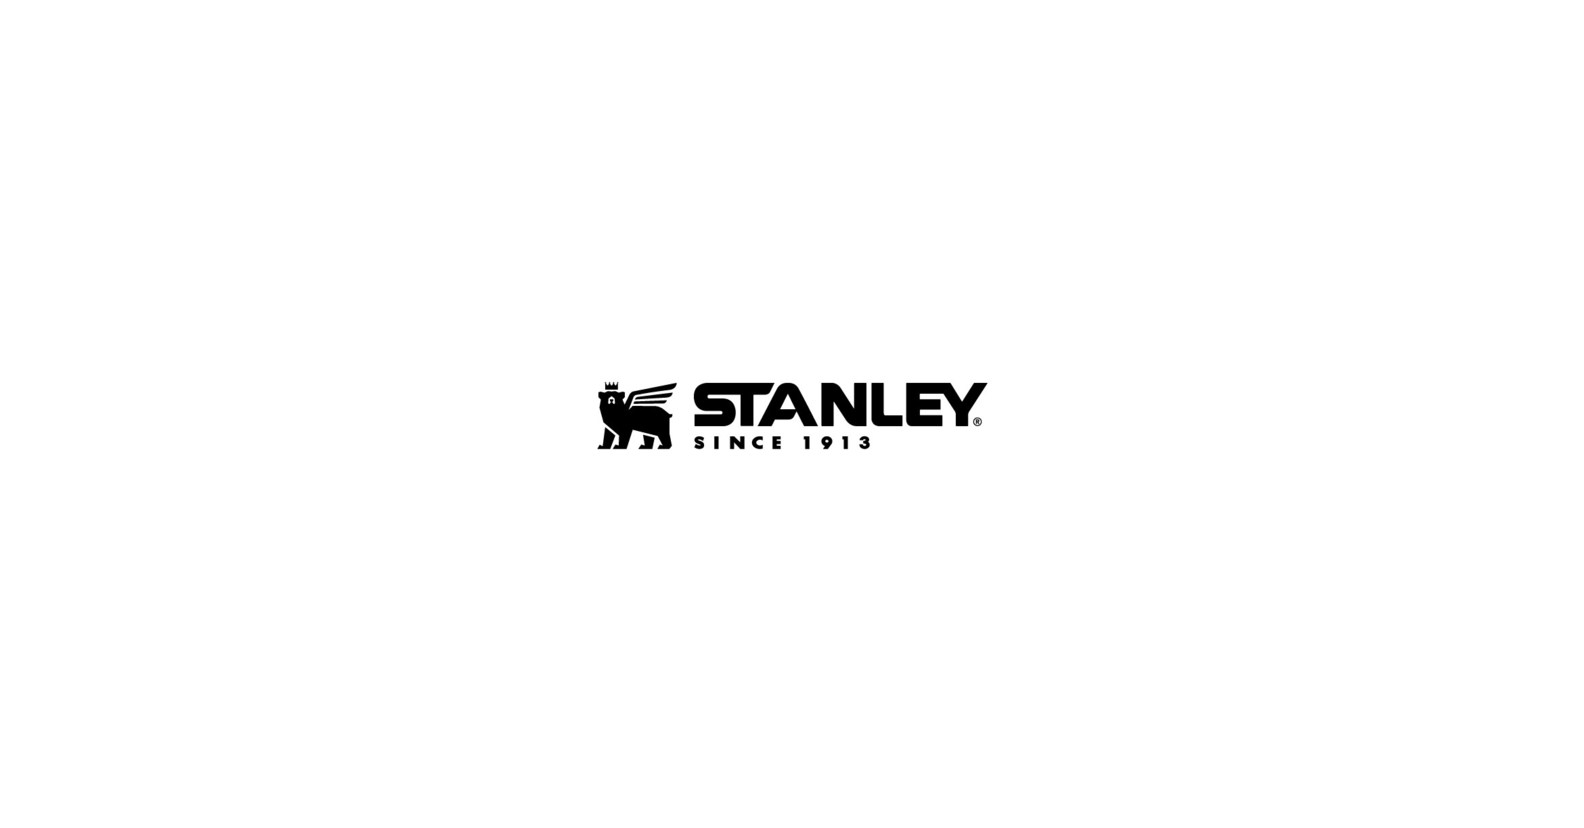 New Collection Just For Kids - Stanley